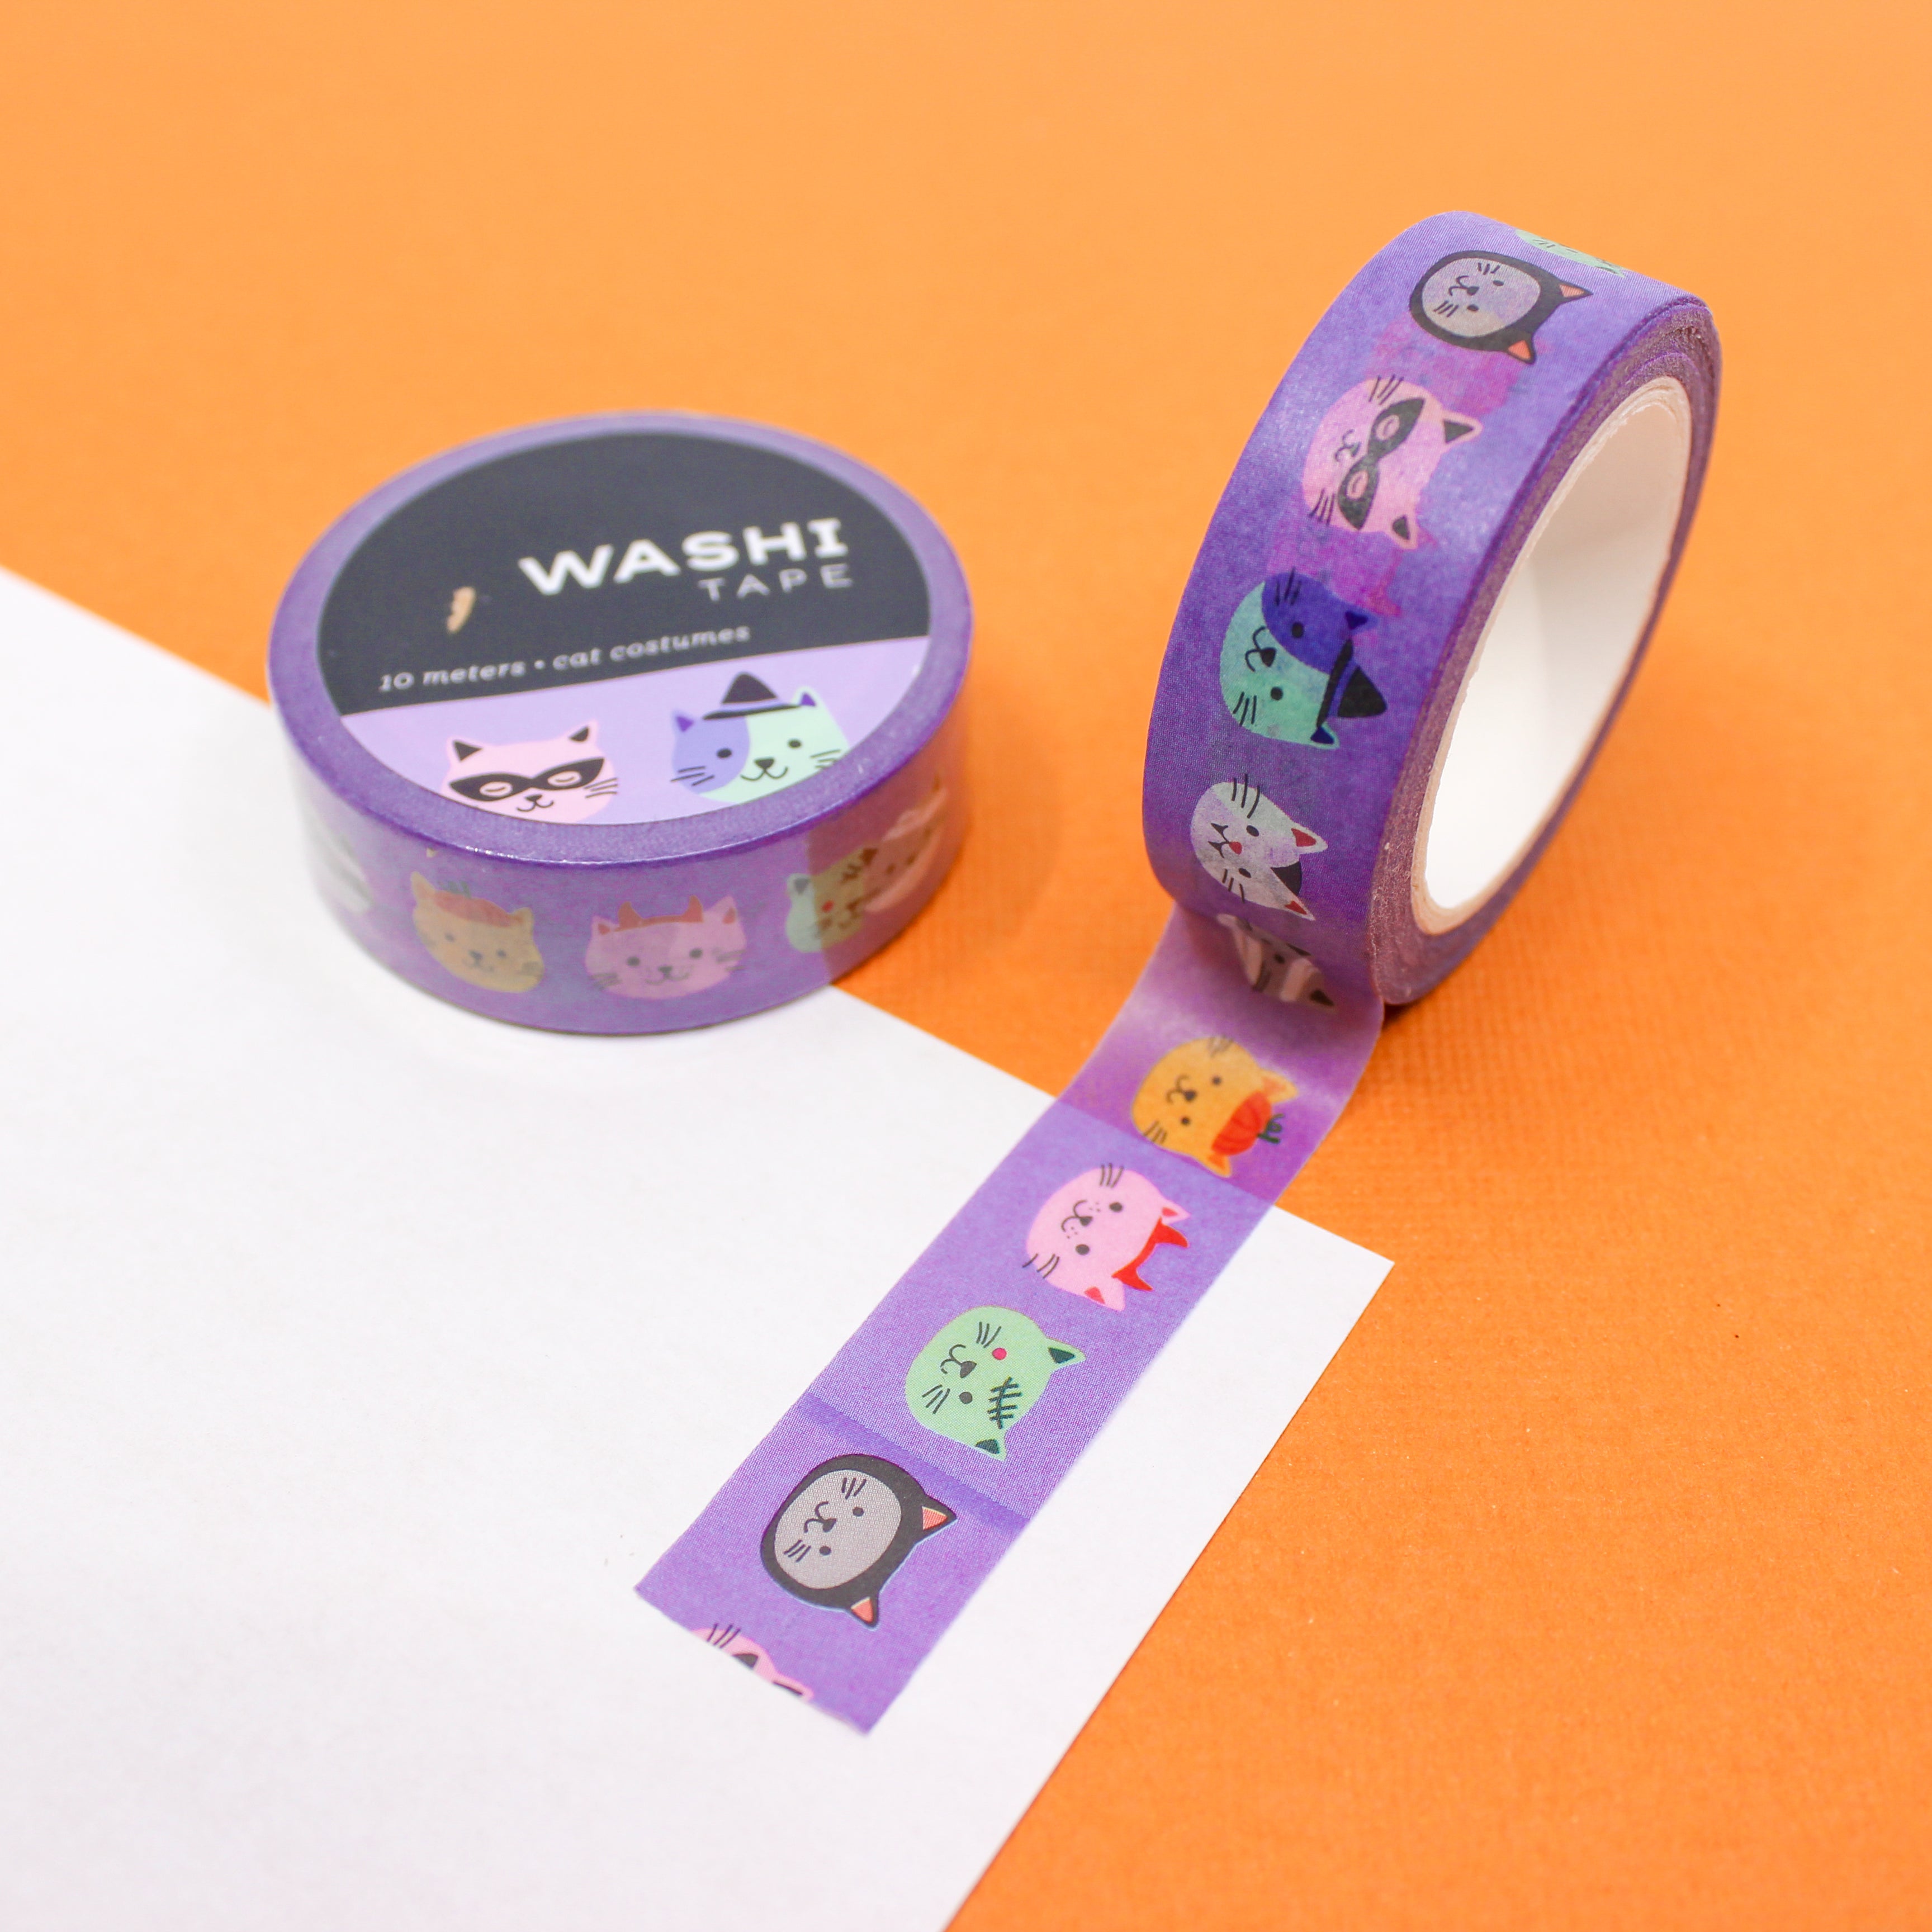 This picture is of purple washi tape with a fun cat costume Halloween theme. The washi tape features Cat faces wearing costumes from BBB Supplies Craft Shop.